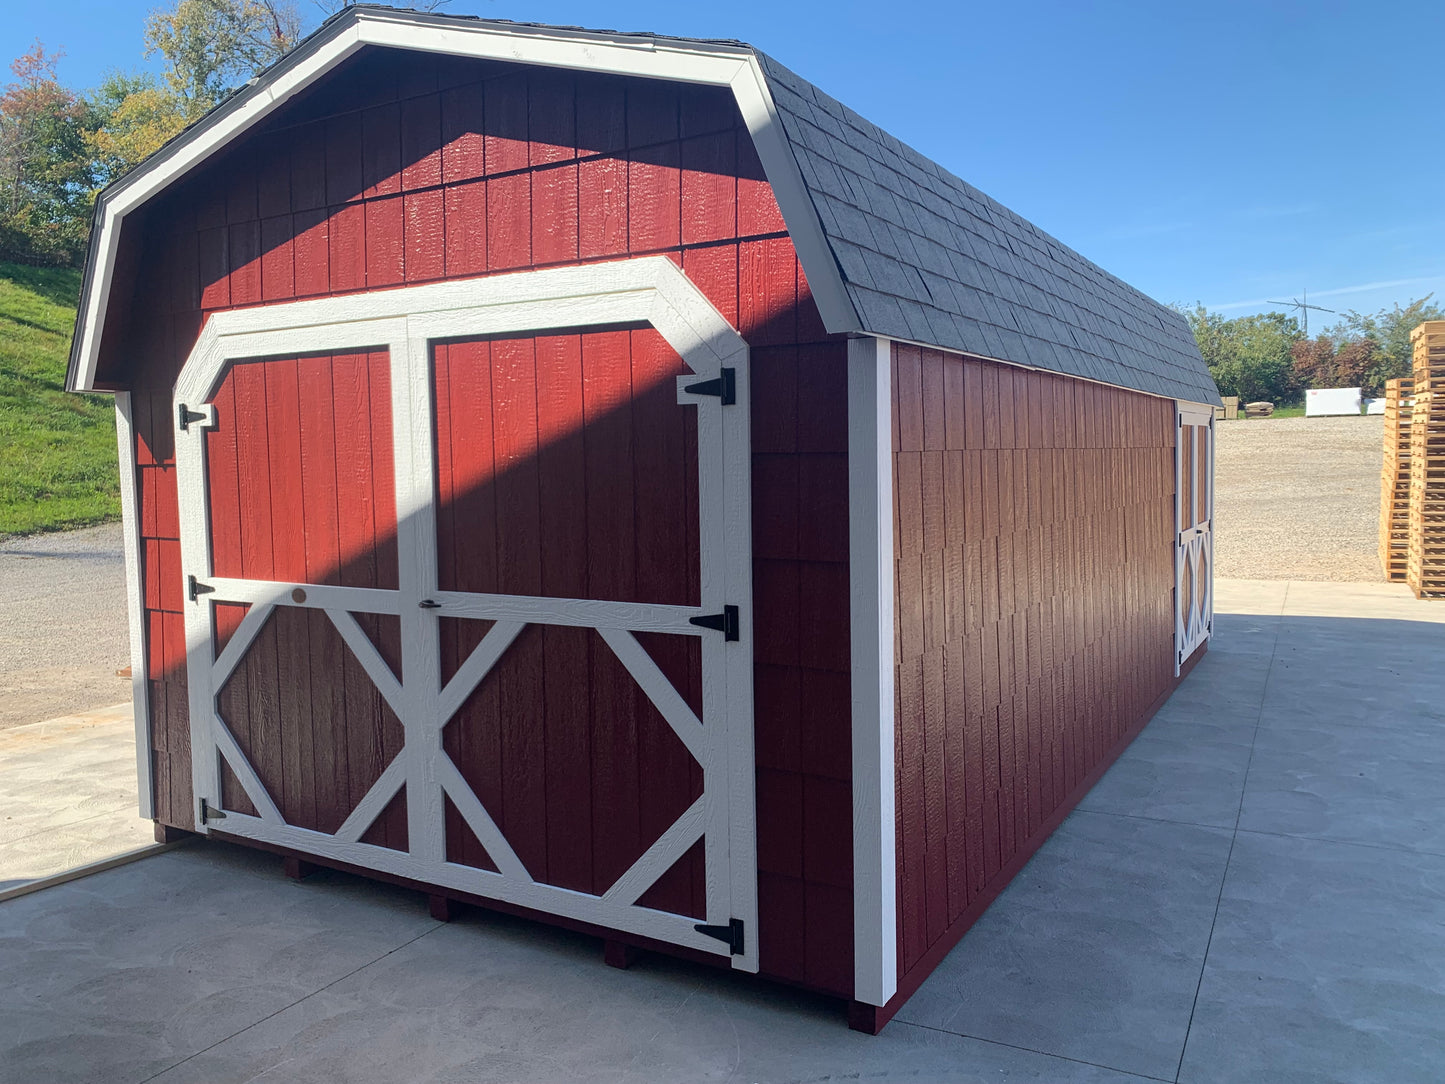 12x24 Lofted Garage/Barn with 6' sidewalls and 18" Lap Siding - Paint